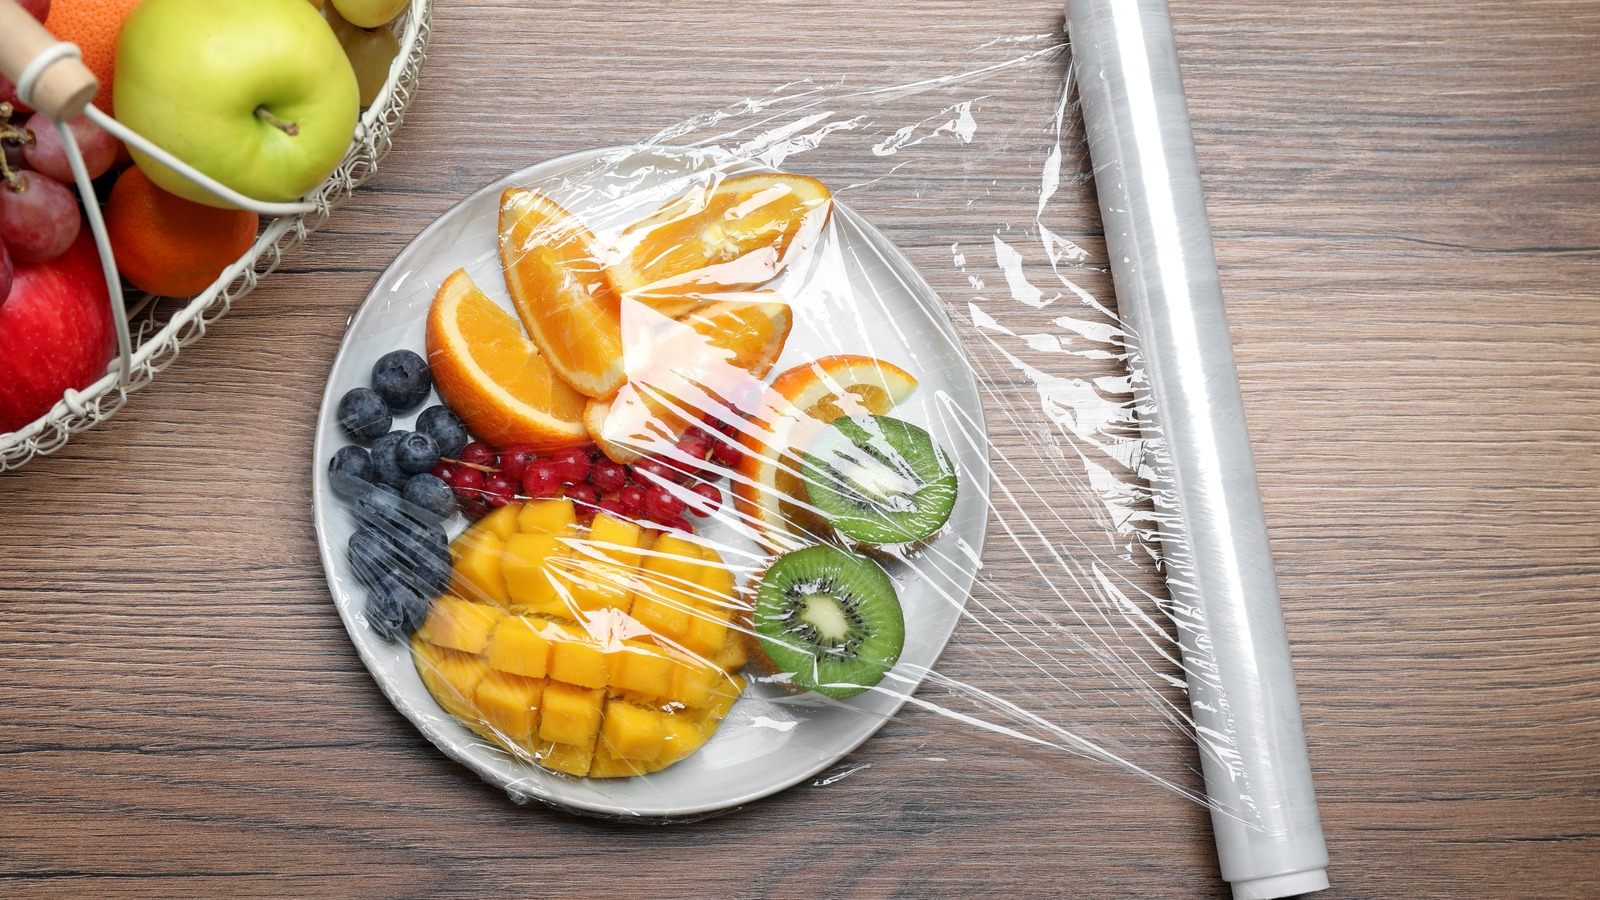 Freeze Plastic Wrap to Eliminate Static Cling